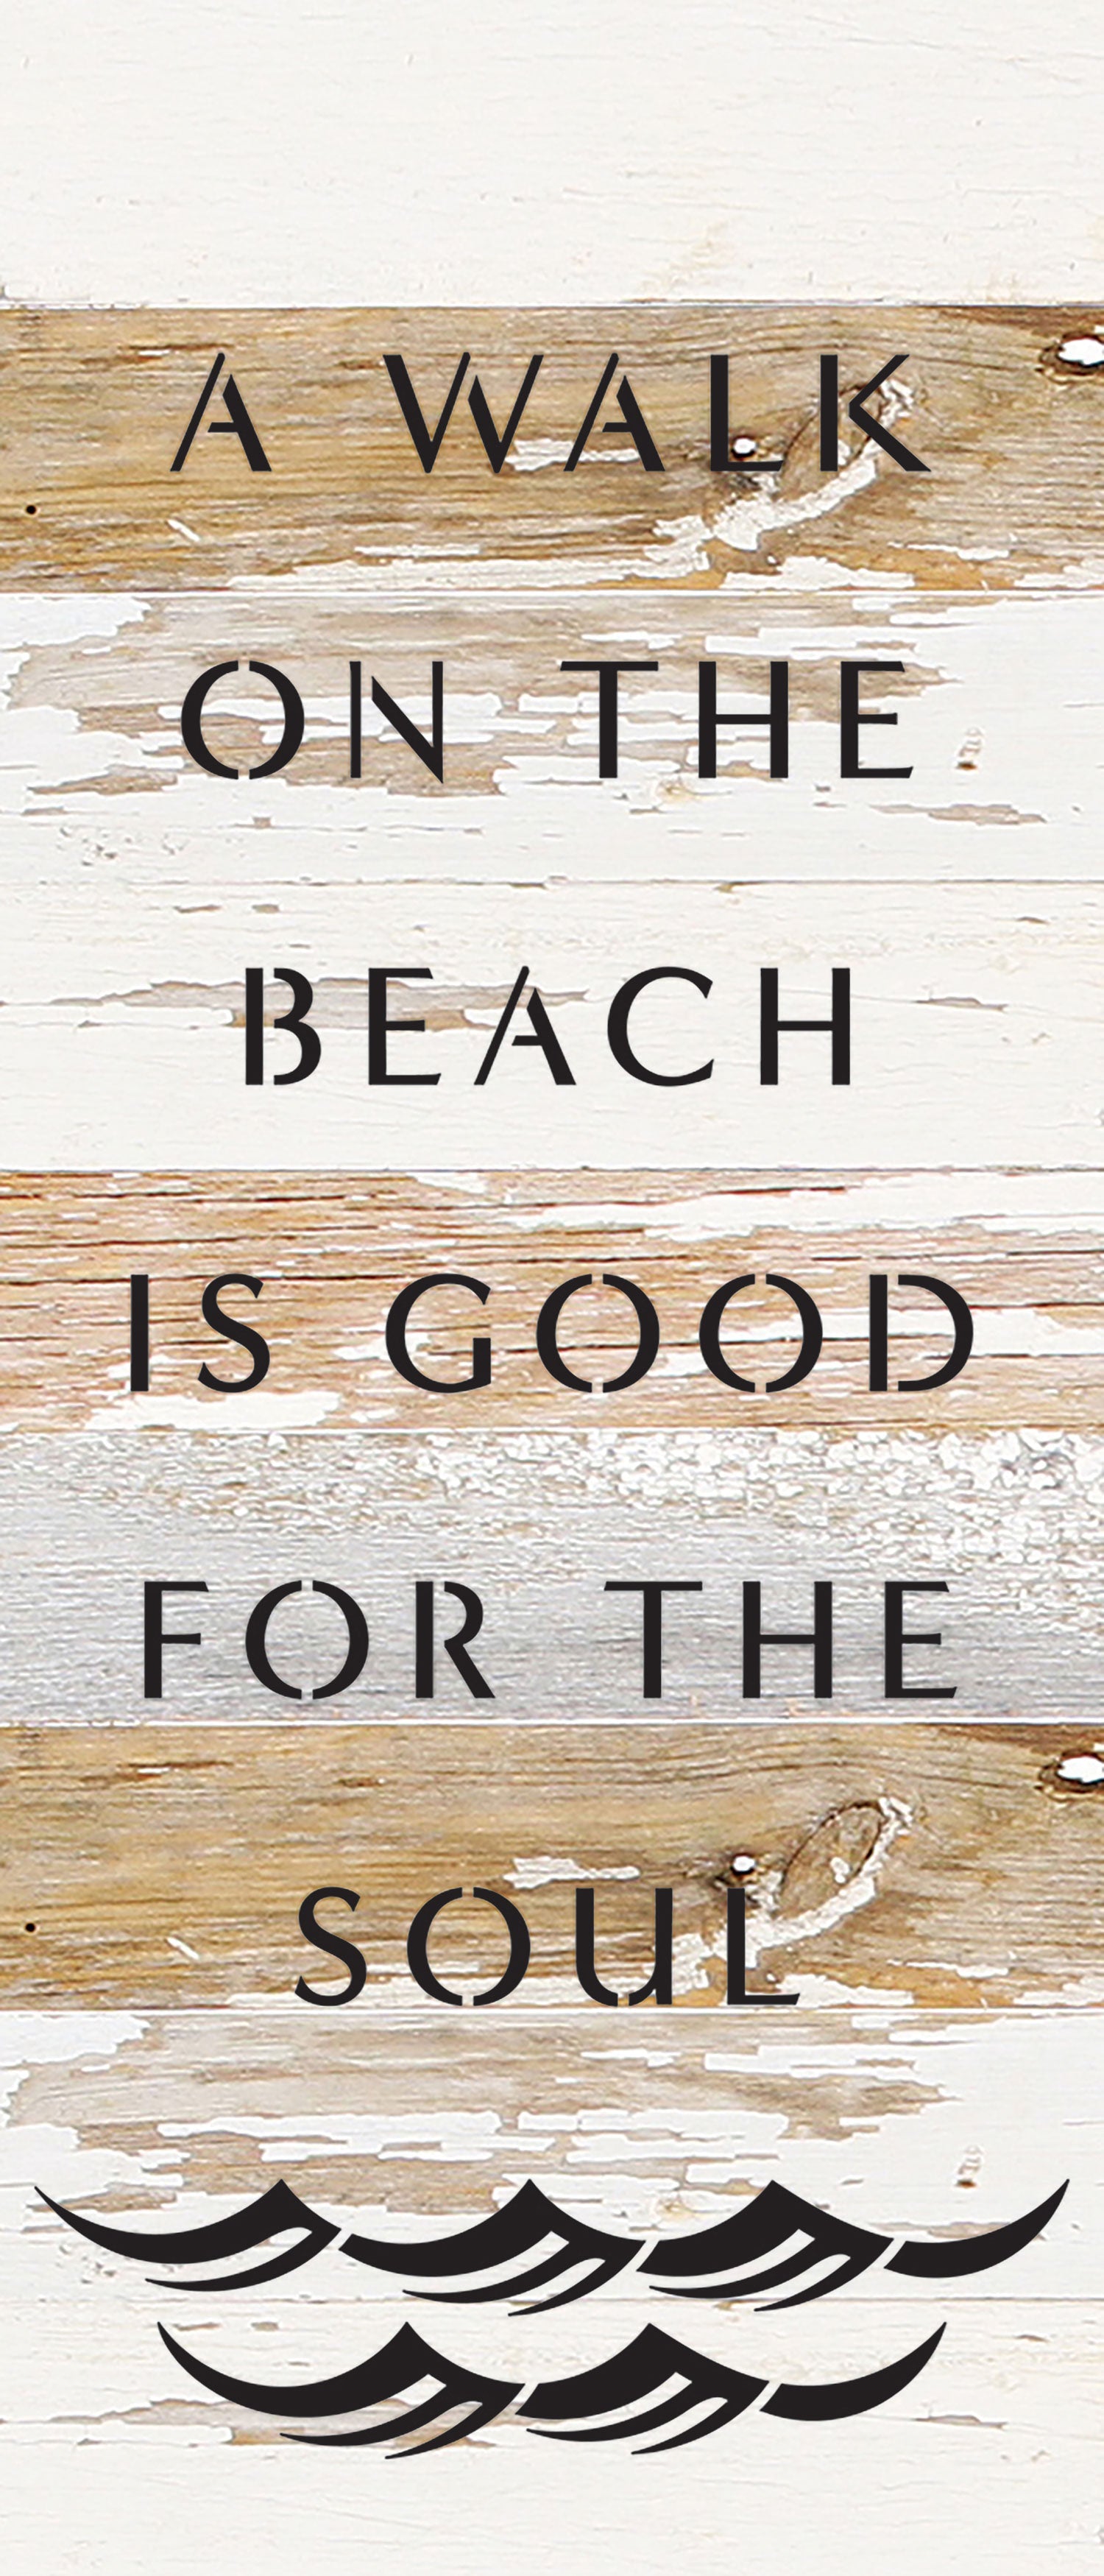 A walk on the beach is good for the soul / 6x14 Reclaimed Wood Wall Decor